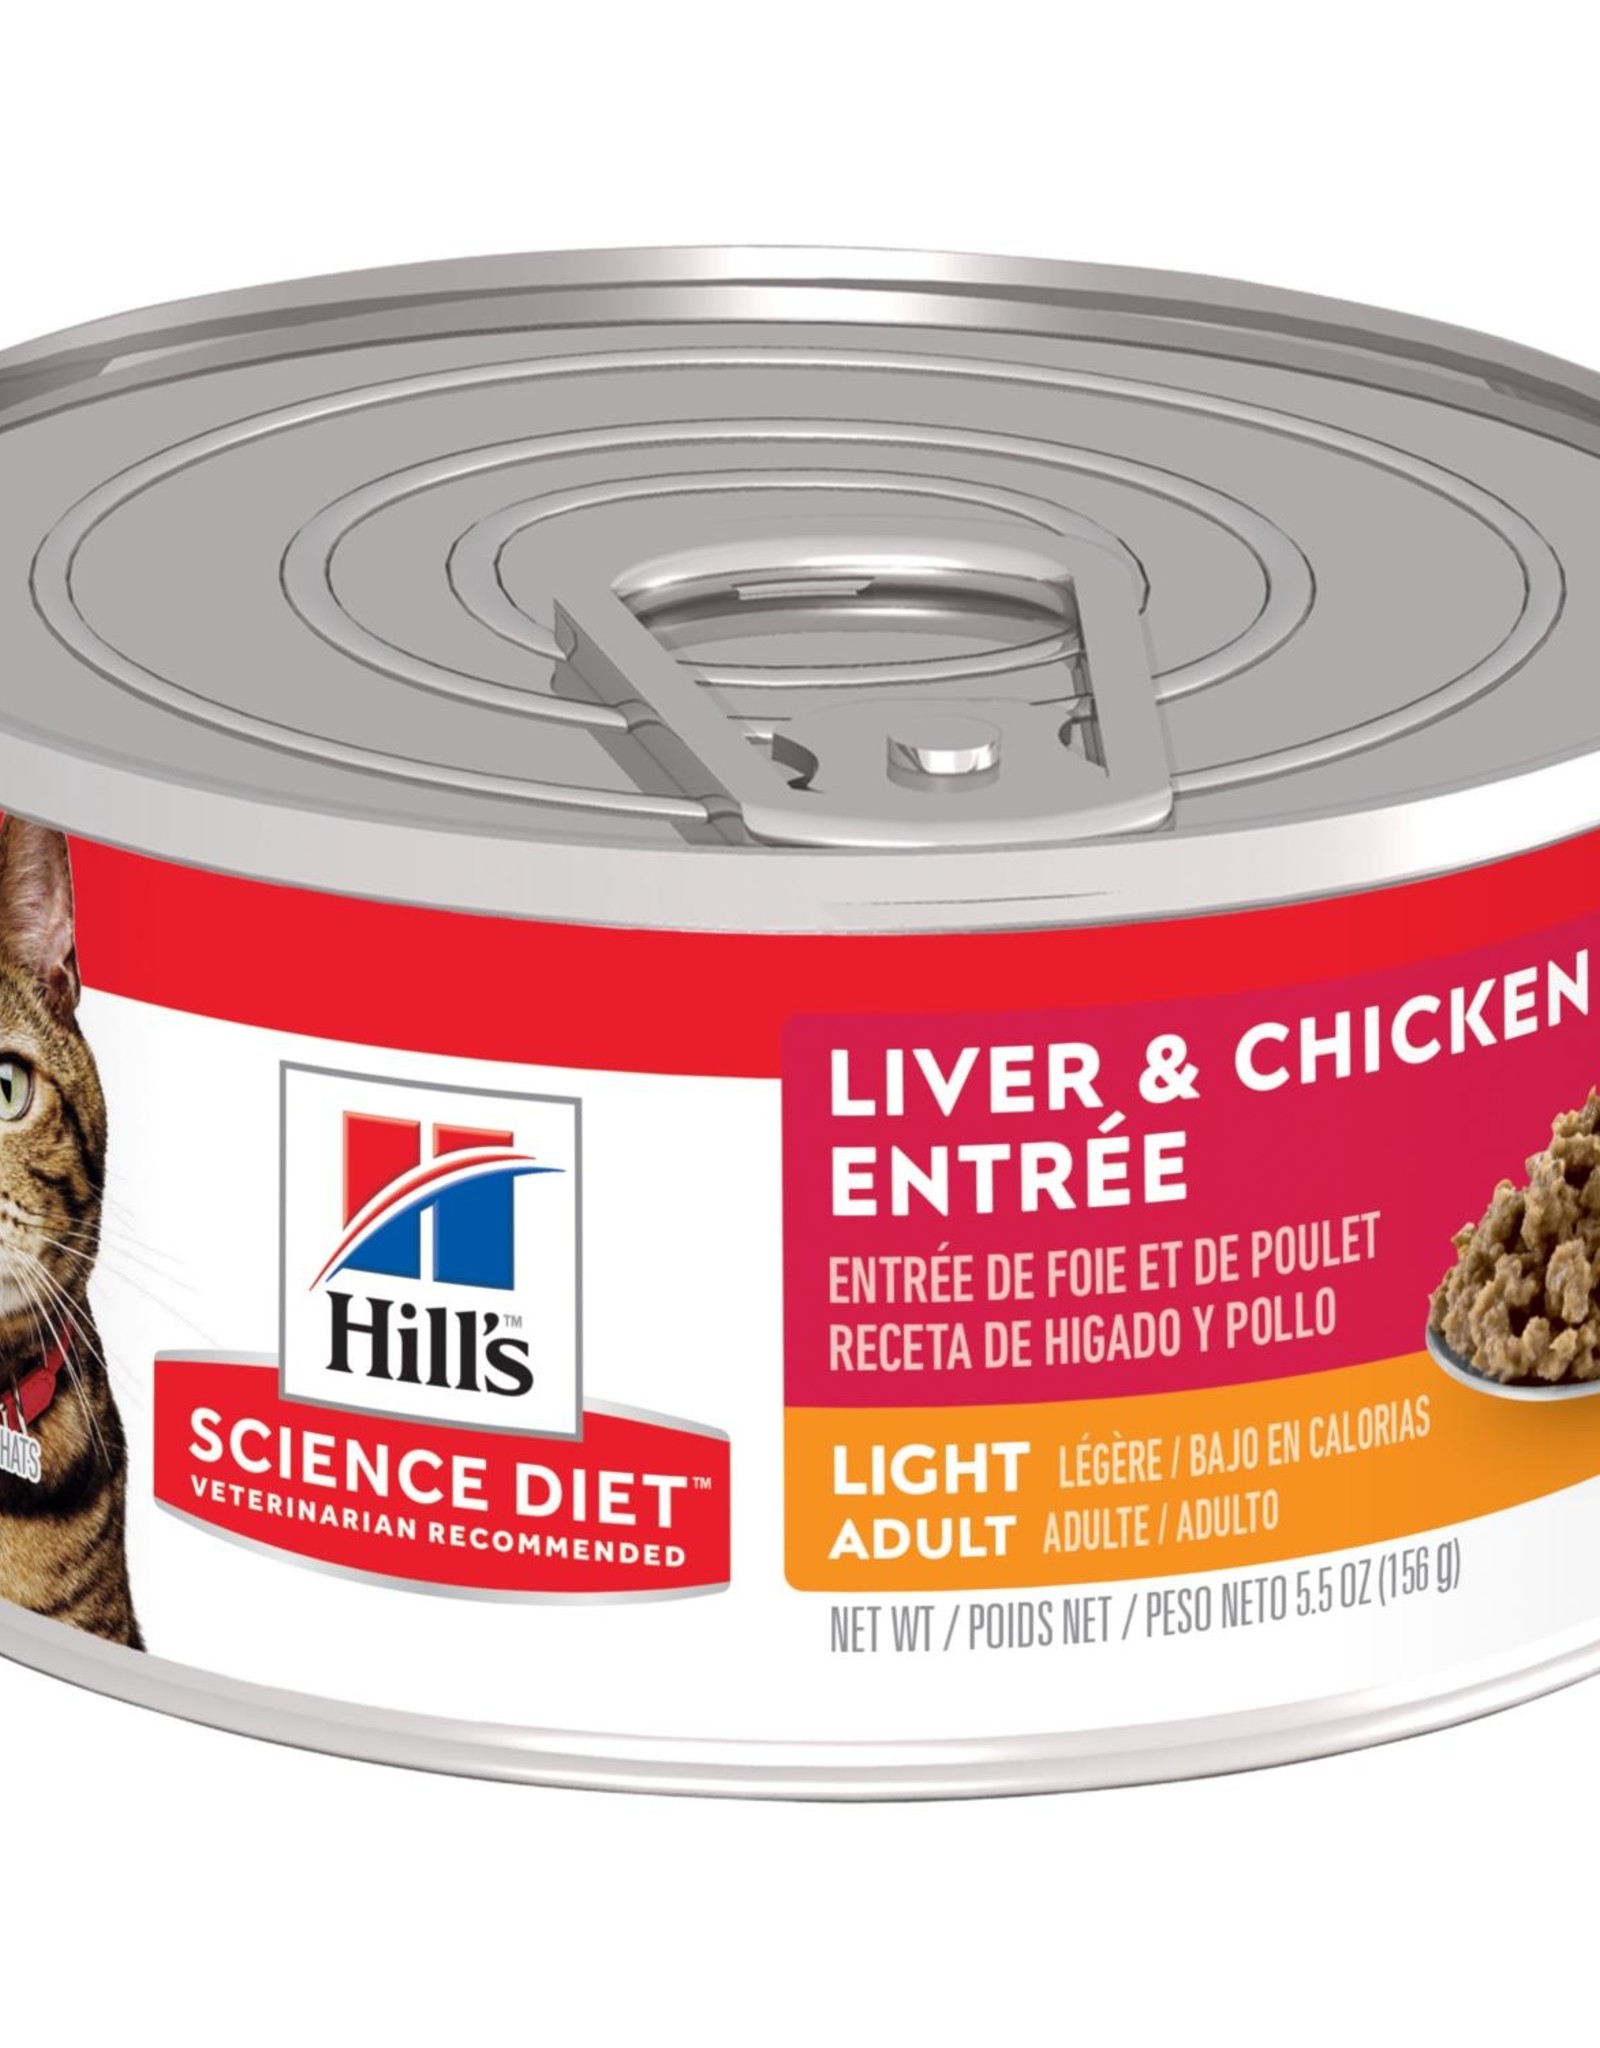 SCIENCE DIET HILL'S SCIENCE DIET CAT CAN ADULT LIGHT LIVER & CHICKEN 2.9OZ CASE OF 24